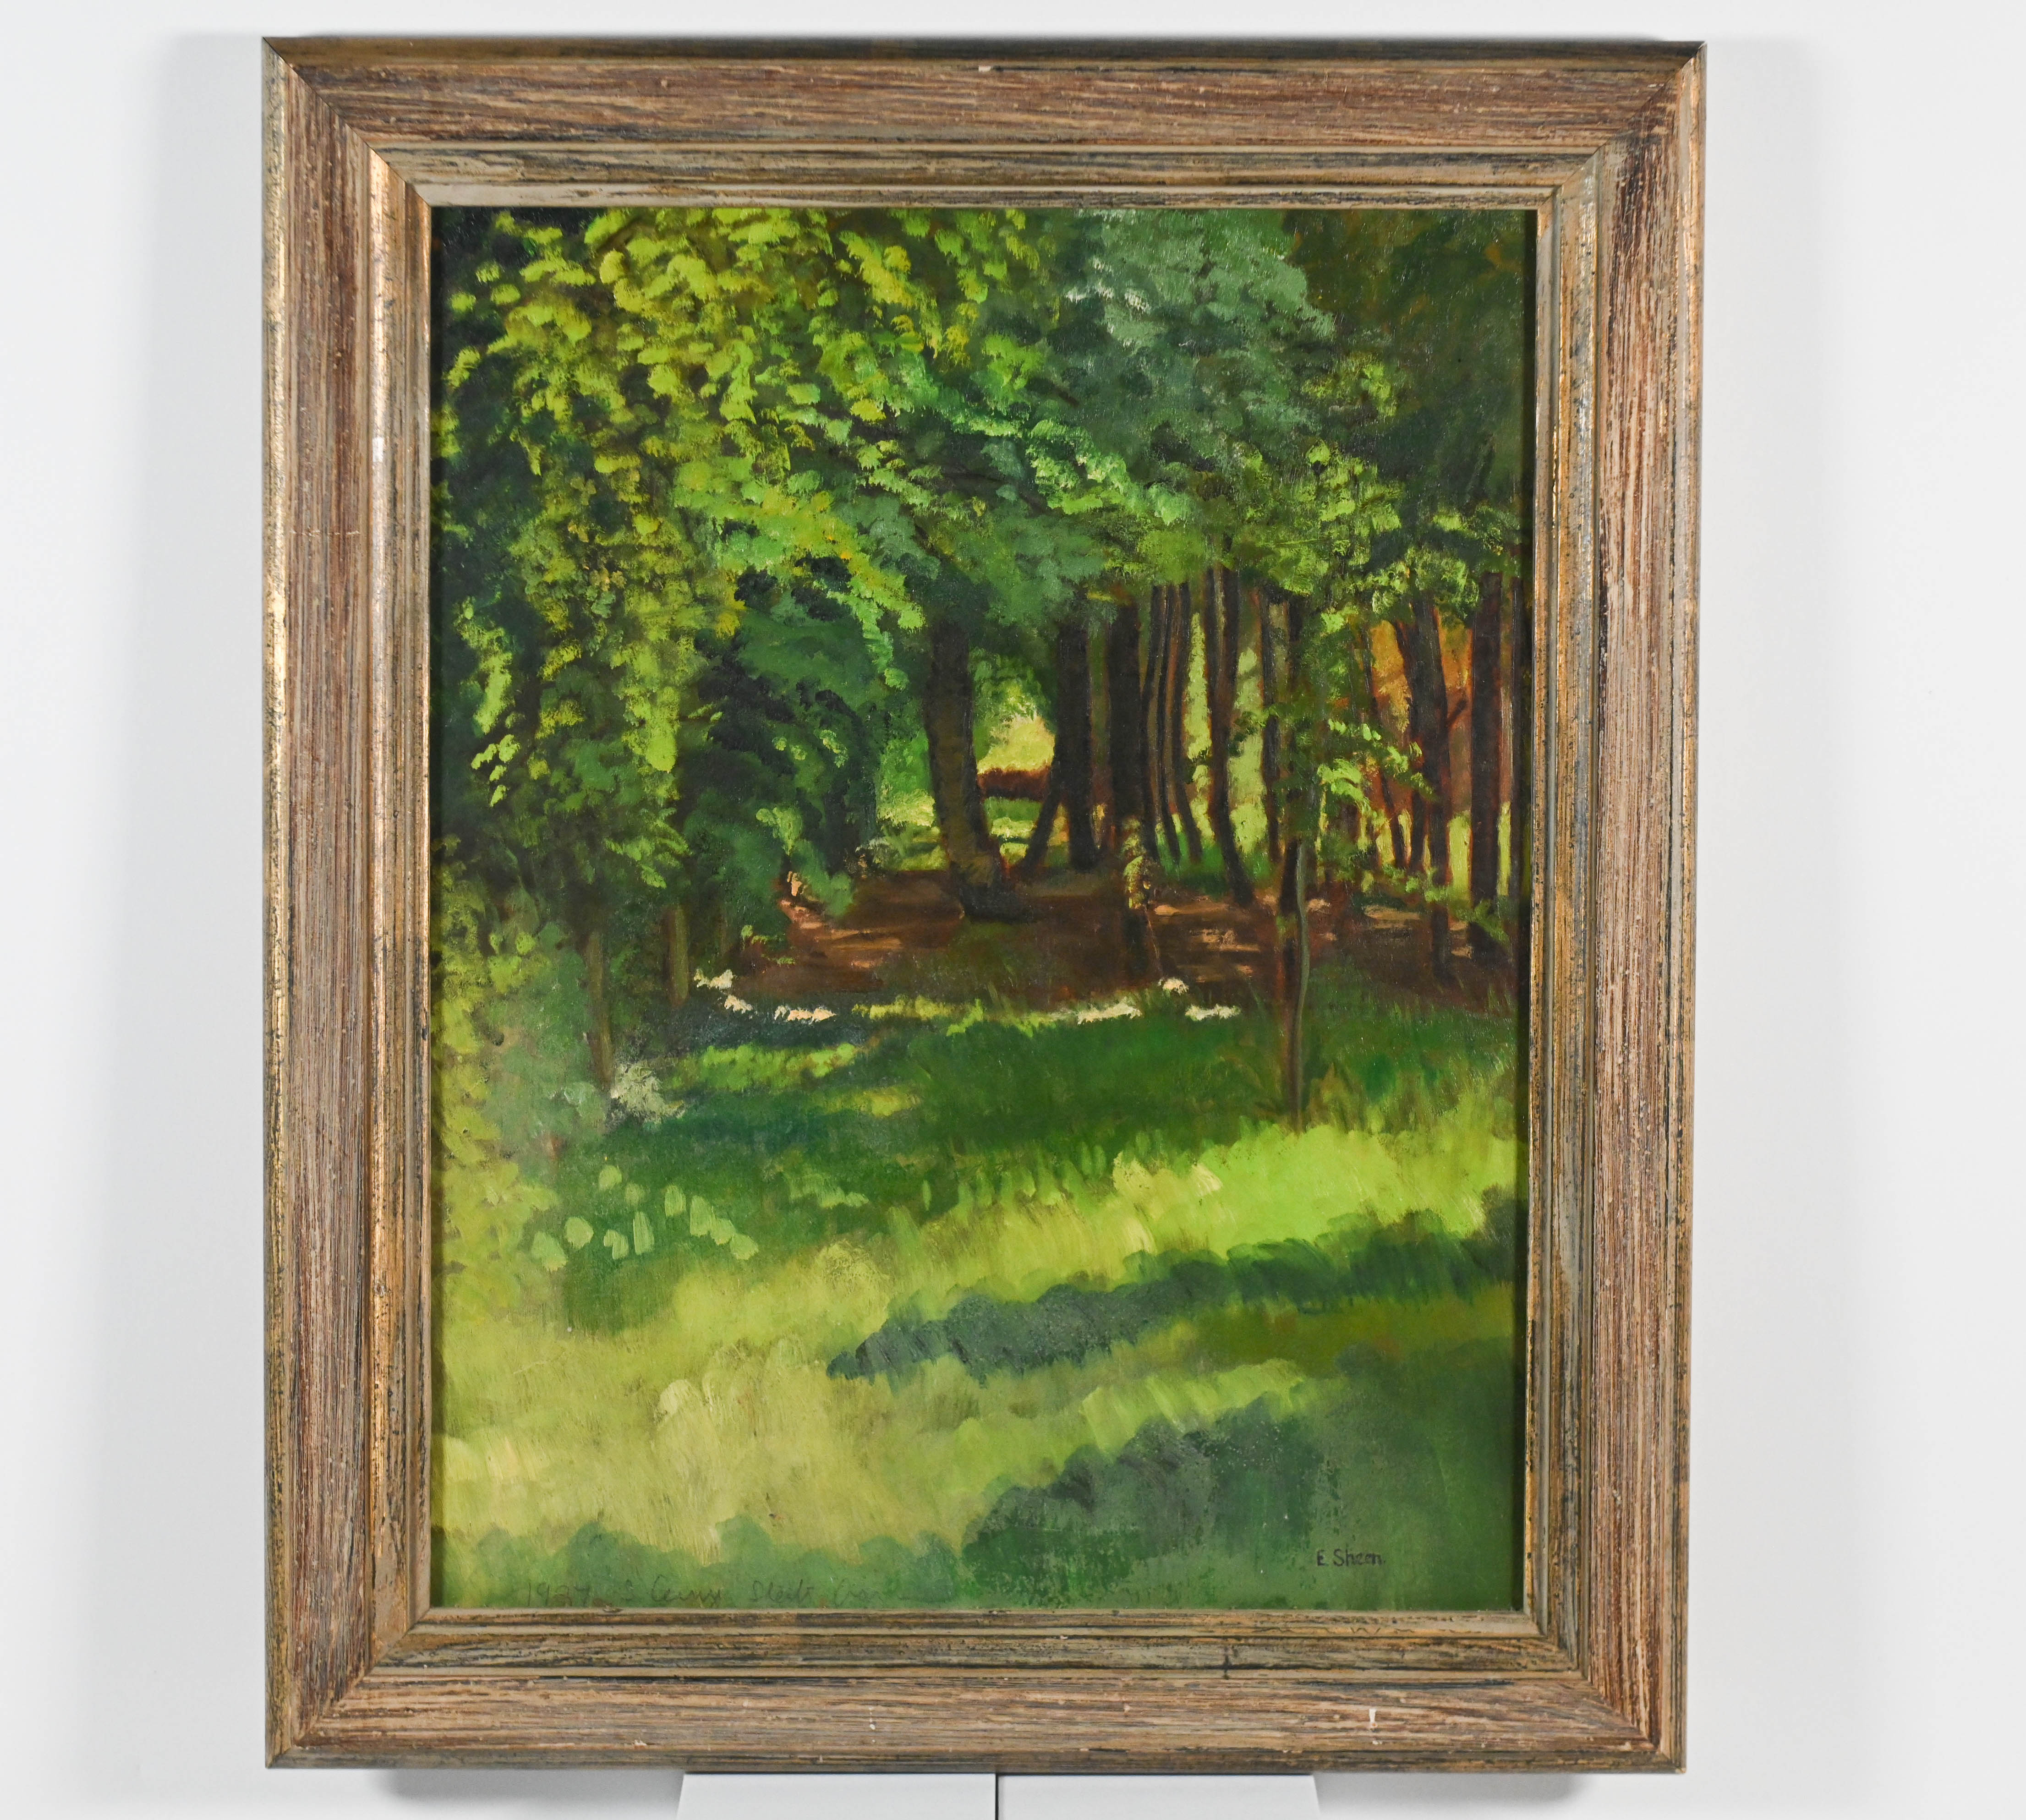 E.J Sheen (Born 1937) 'Trees In The Garden, South Cerney I' oil sketch on panel with paper label